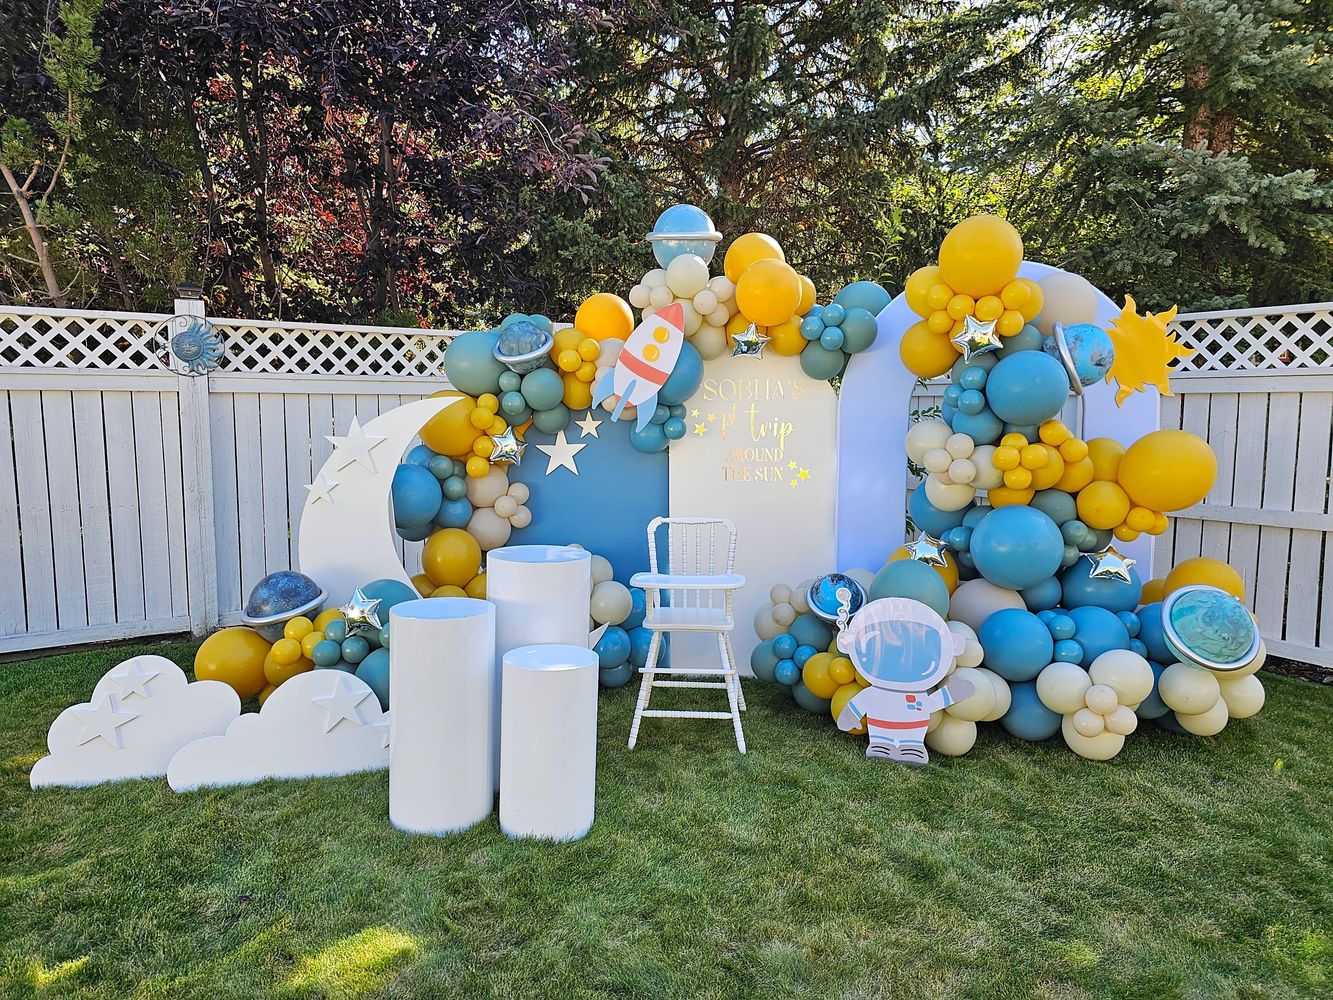 A space-themed custom birthday balloon arrangement with rockets and astronauts on a lawn.